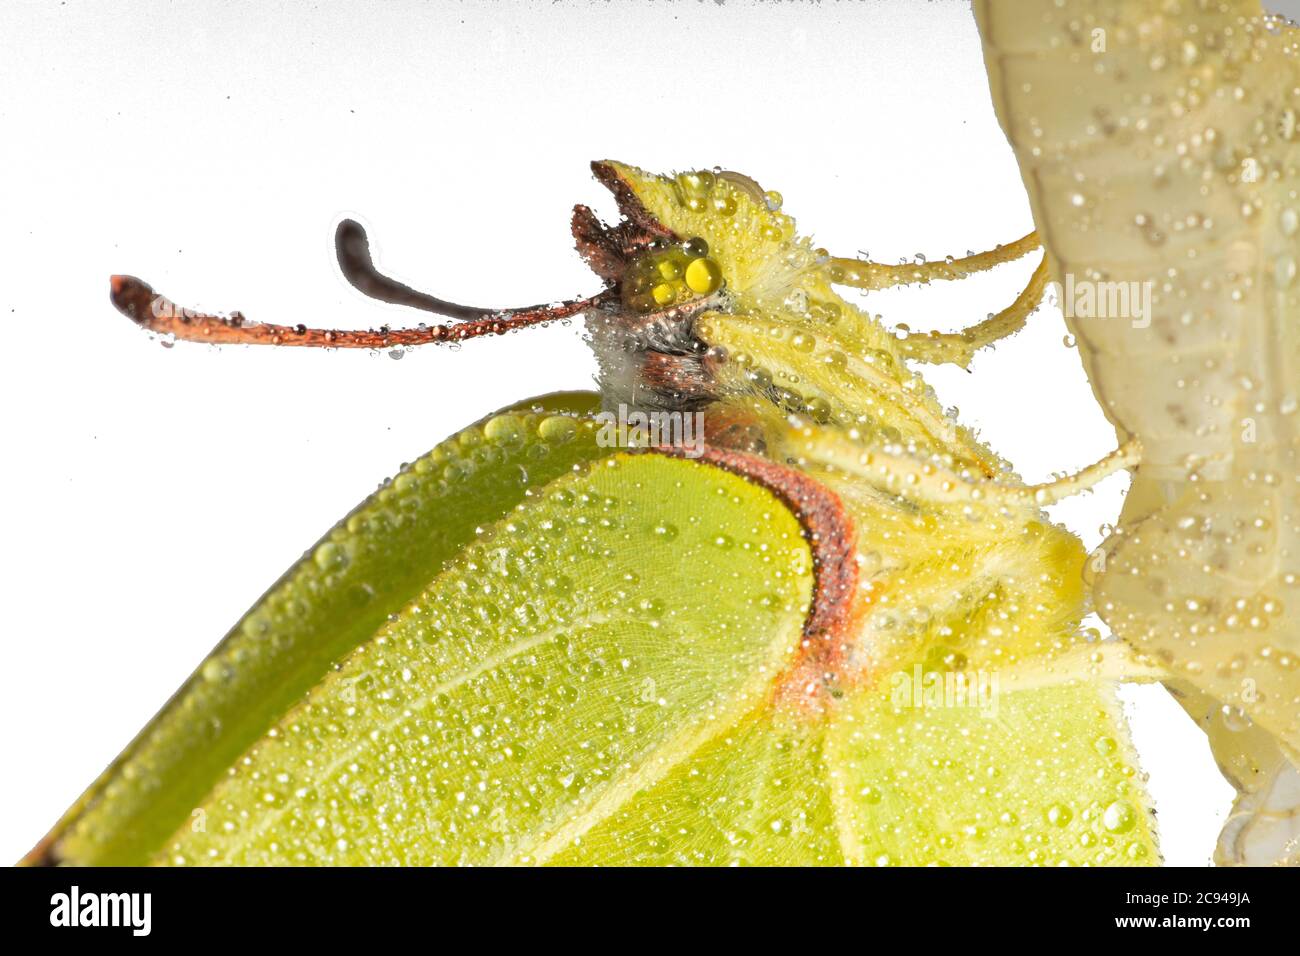 A common brimstone butterfly (Gonepteryx rhamni) as it emerges from the chrysallis. Stock Photo